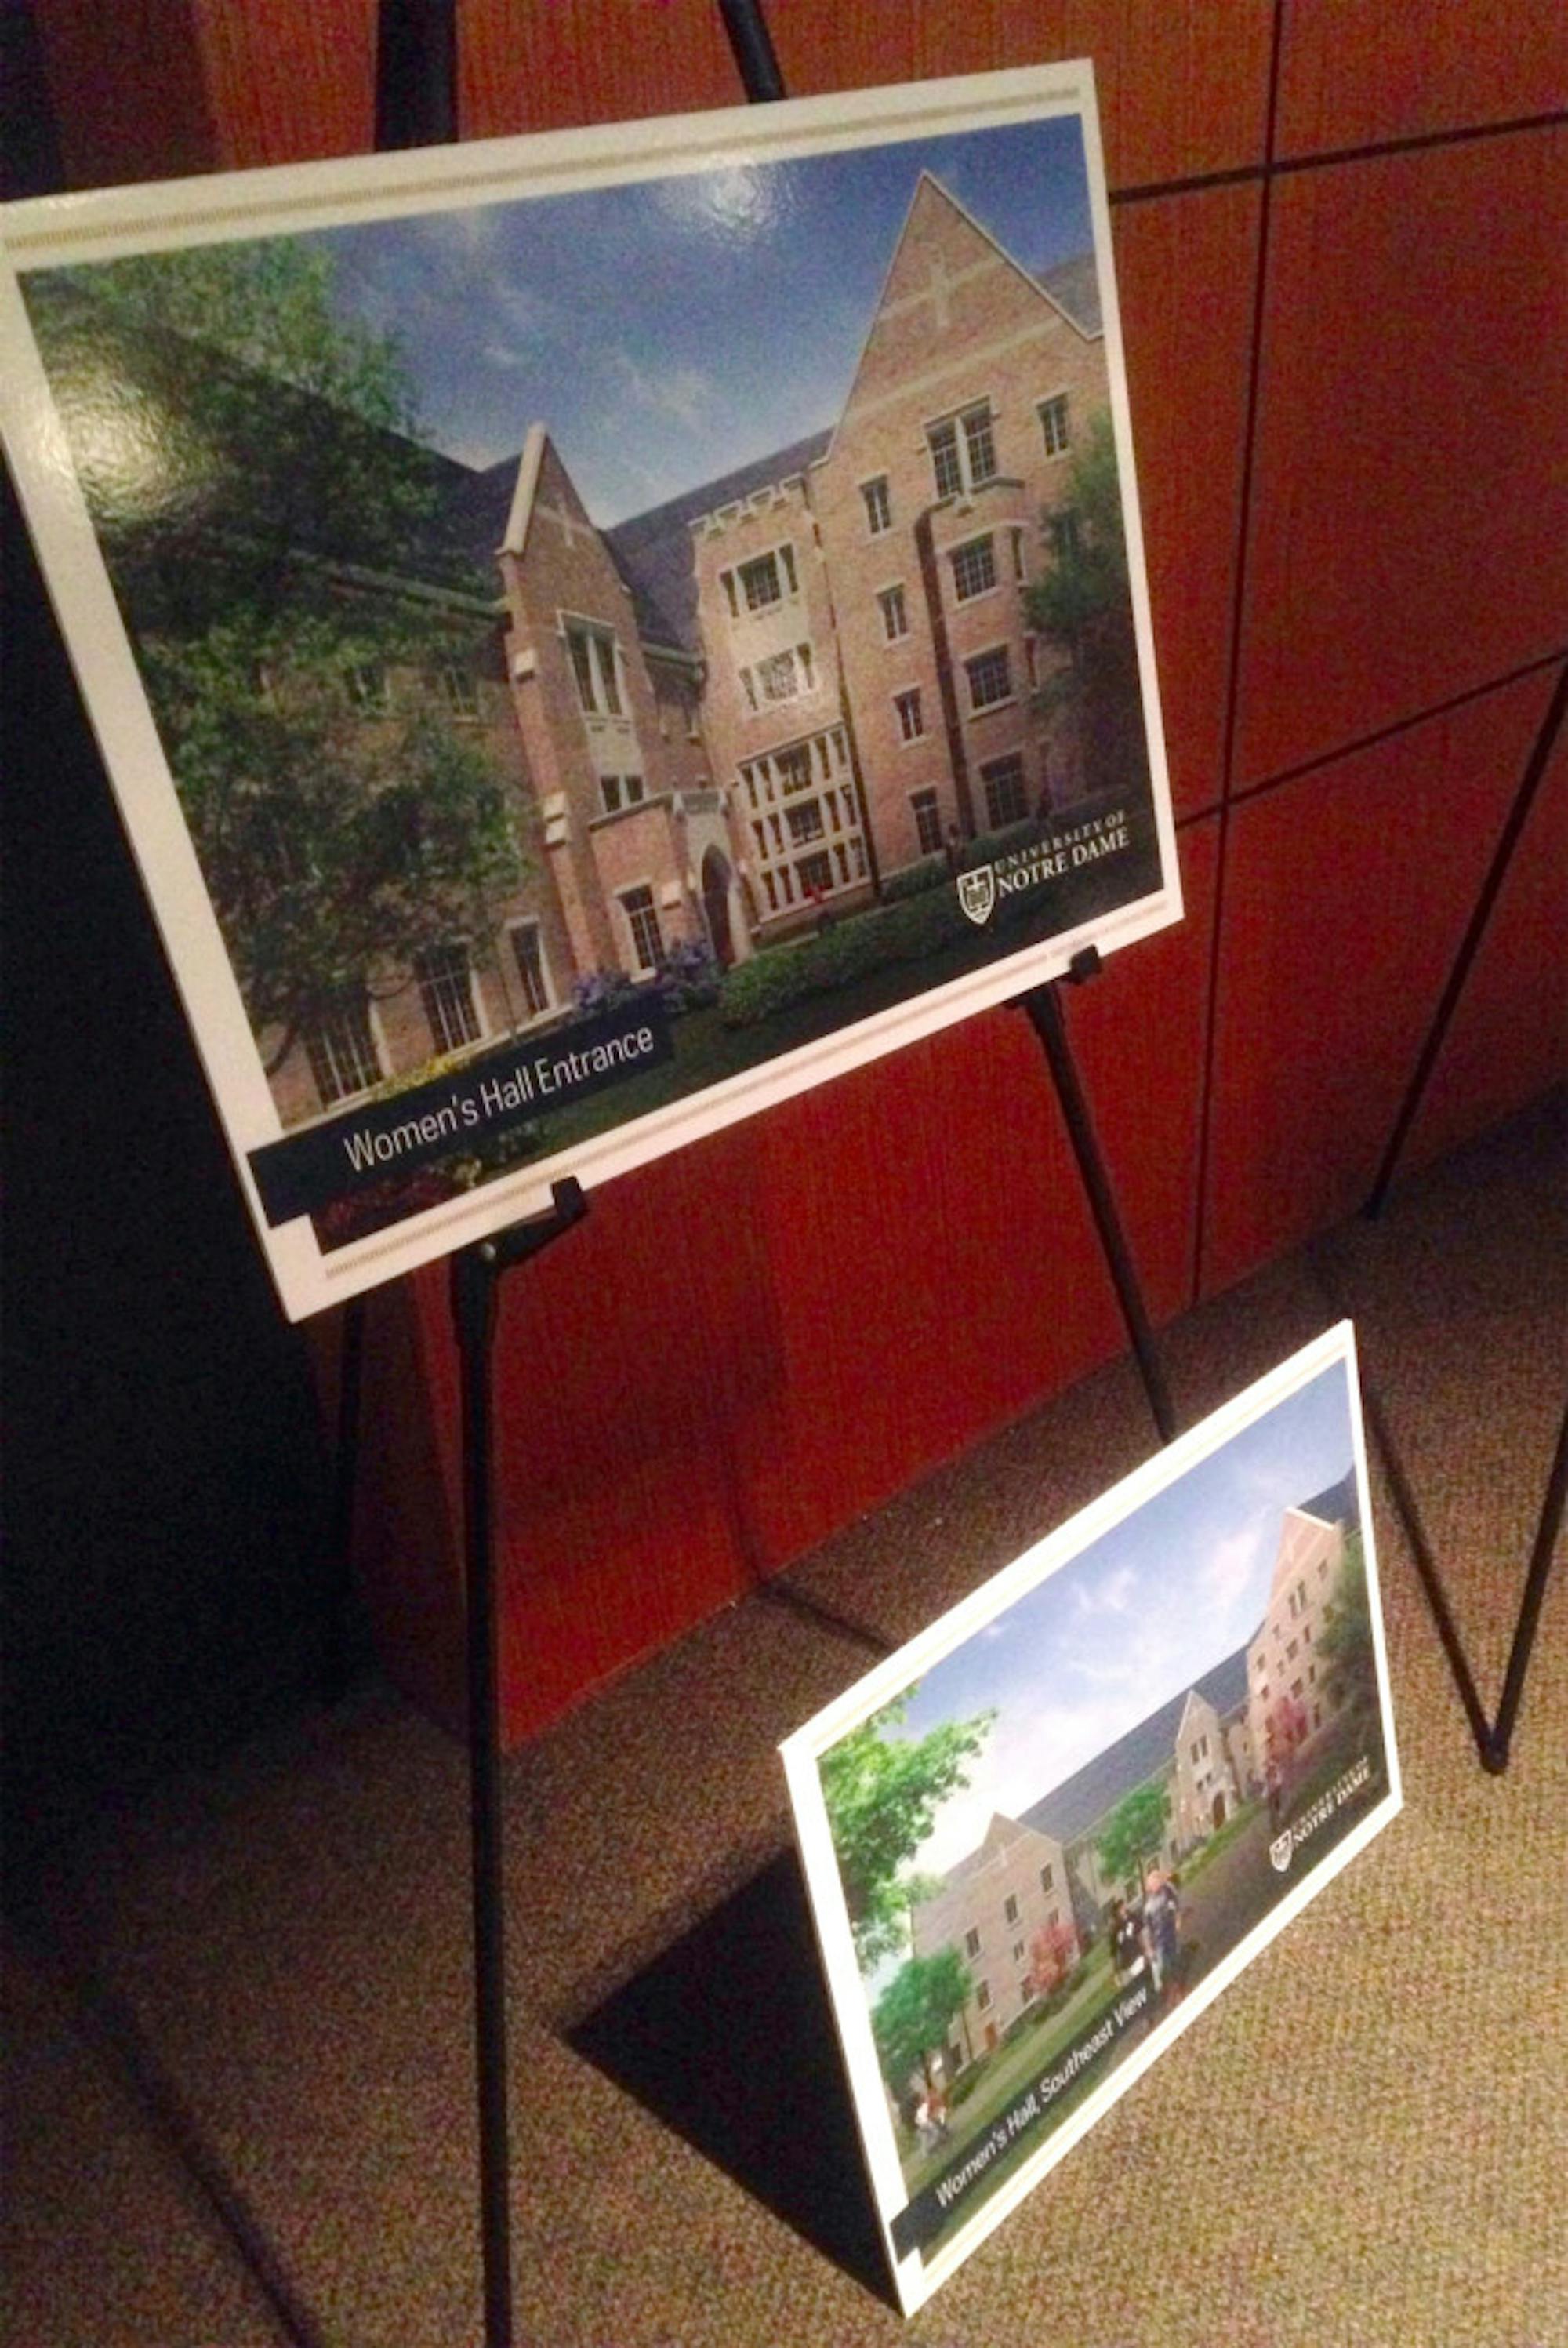 The Office of Student Affairs showcases pictures of what two new residential halls opening in the fall of 2016 will look like.